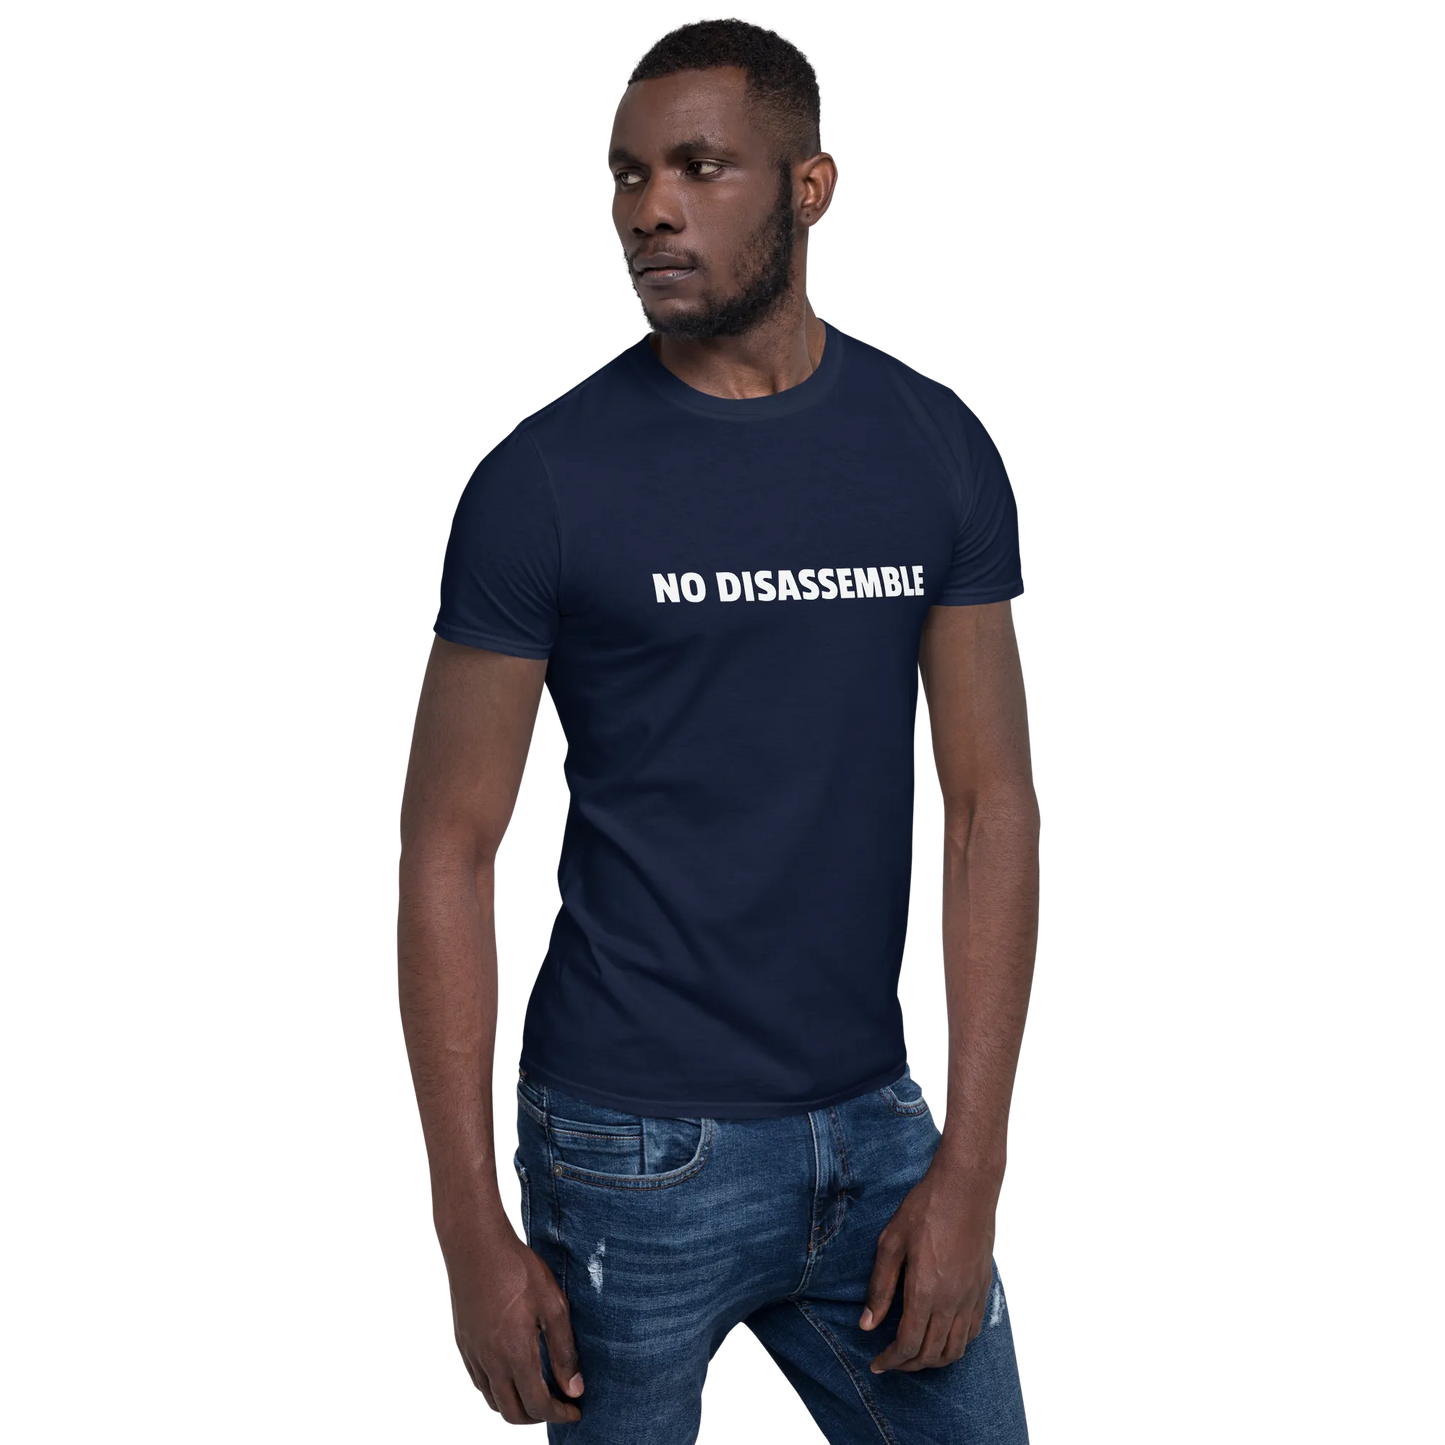 No Disassemble Tee in Navy on man front